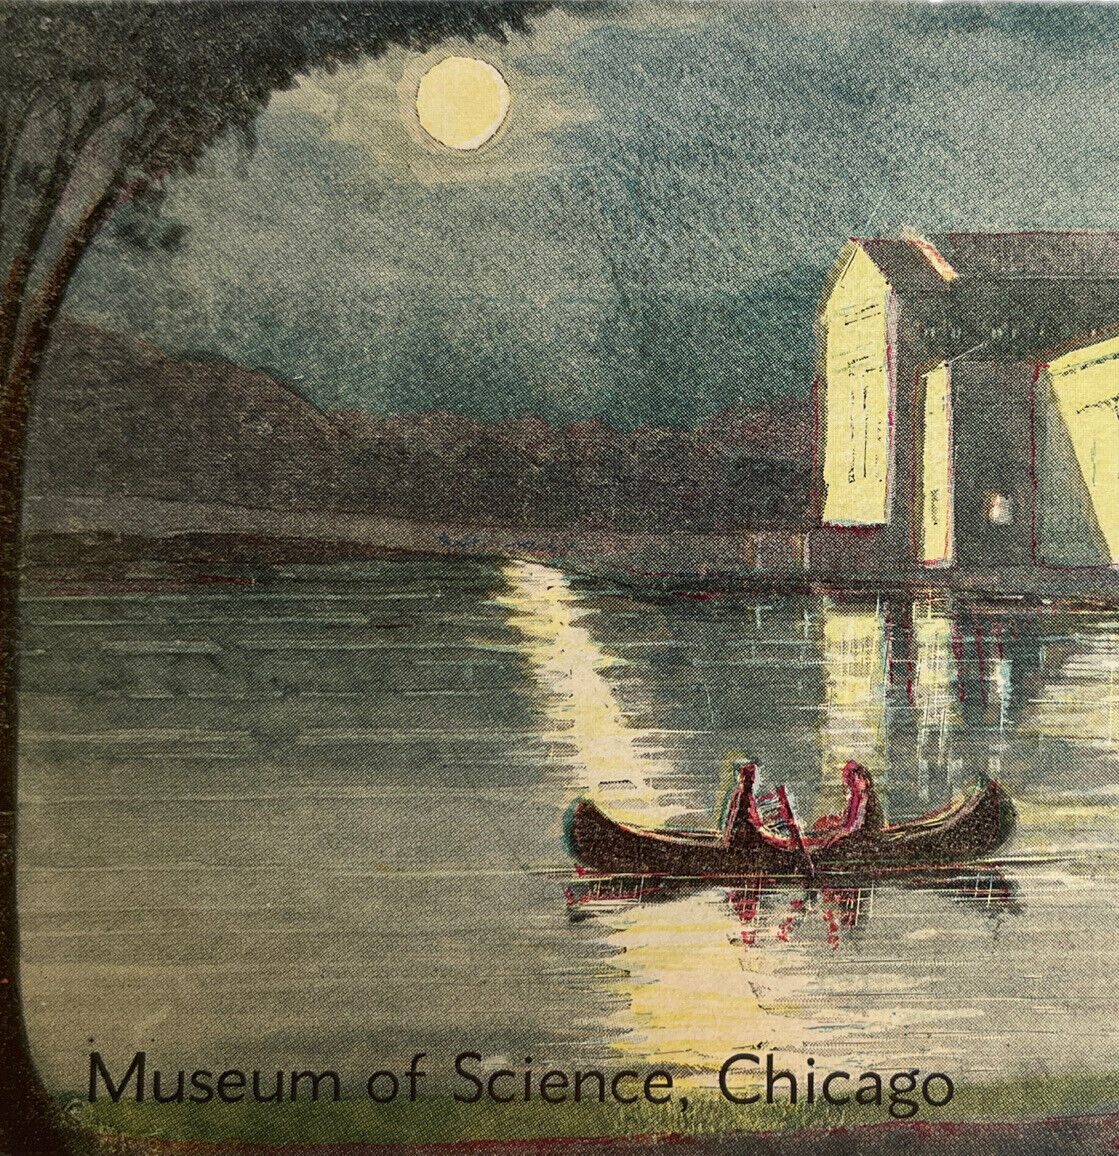 Vtg Litho Postcard 1930s Linen Museum Of Science Chicago Moonlight By Lueter